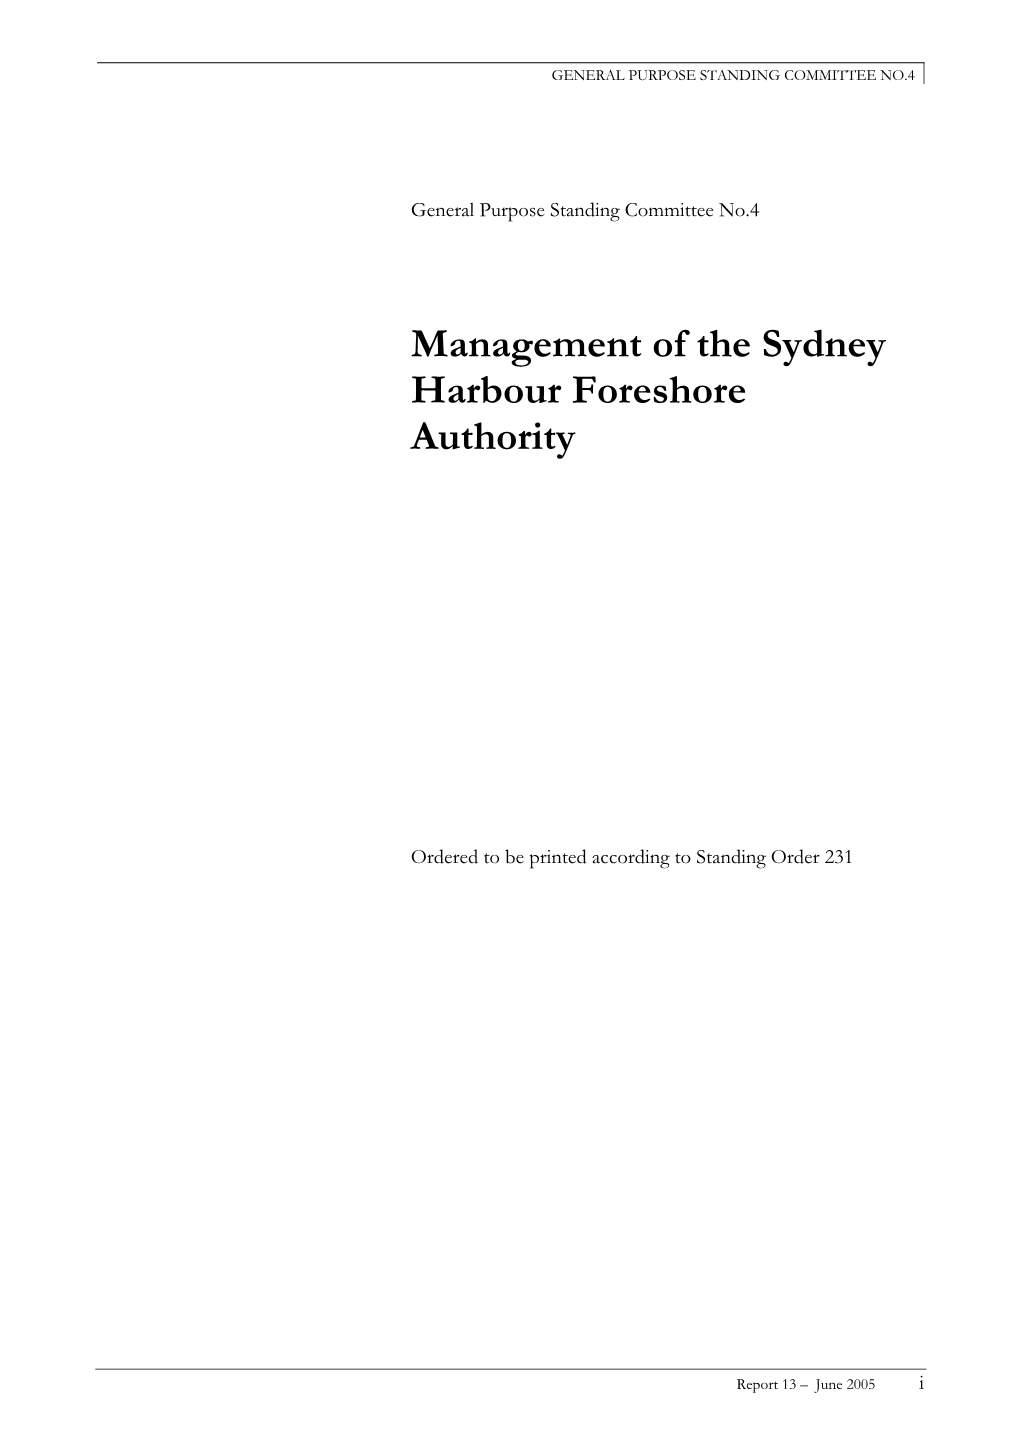 Management of the Sydney Harbour Foreshore Authority